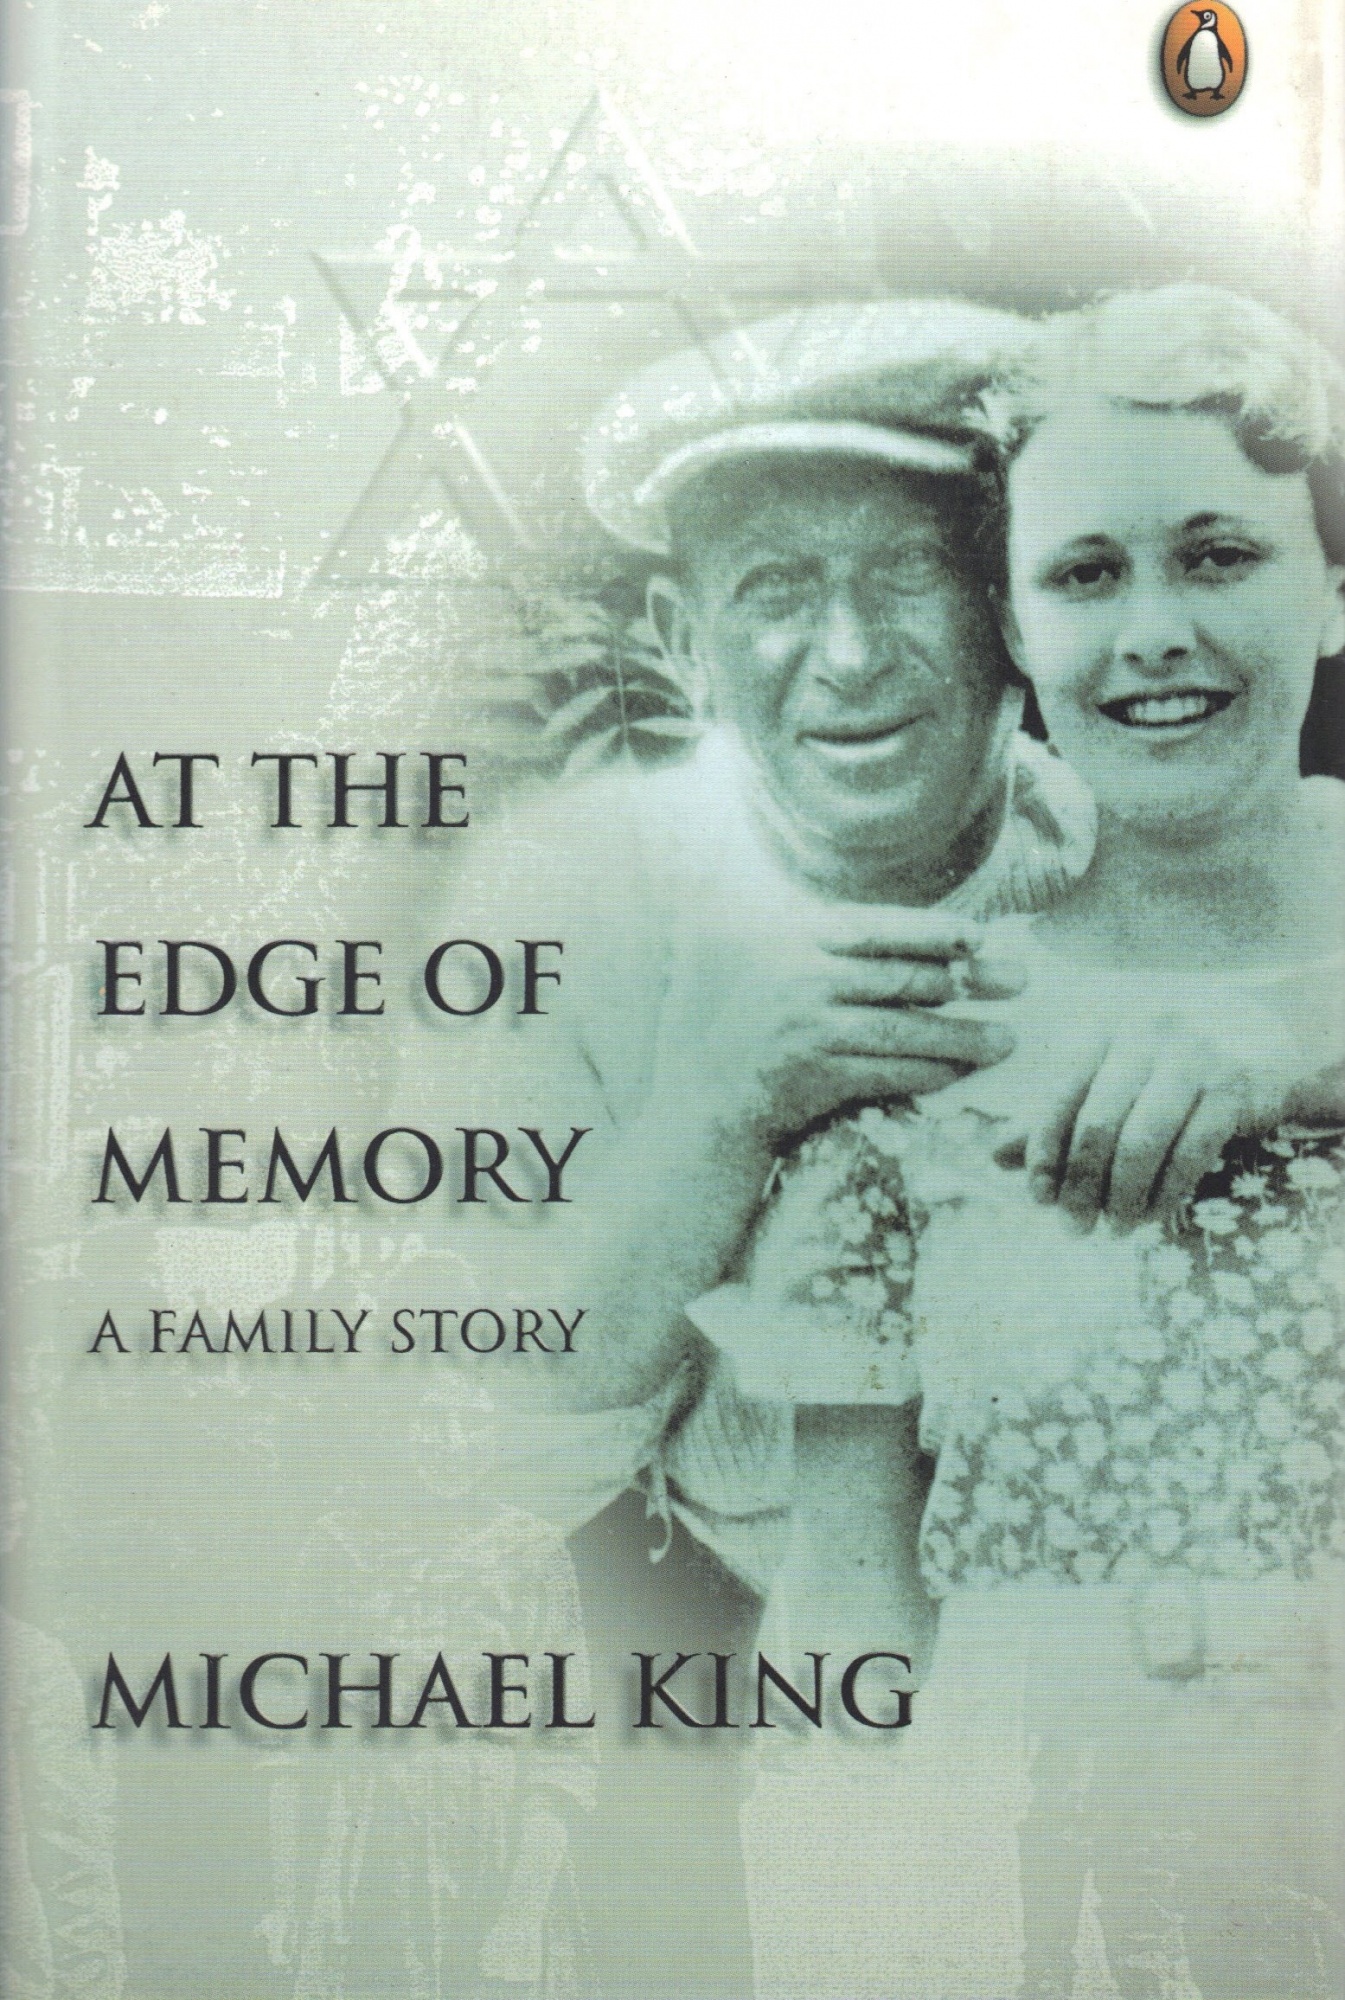 At the Edge of Memory - A Family Story